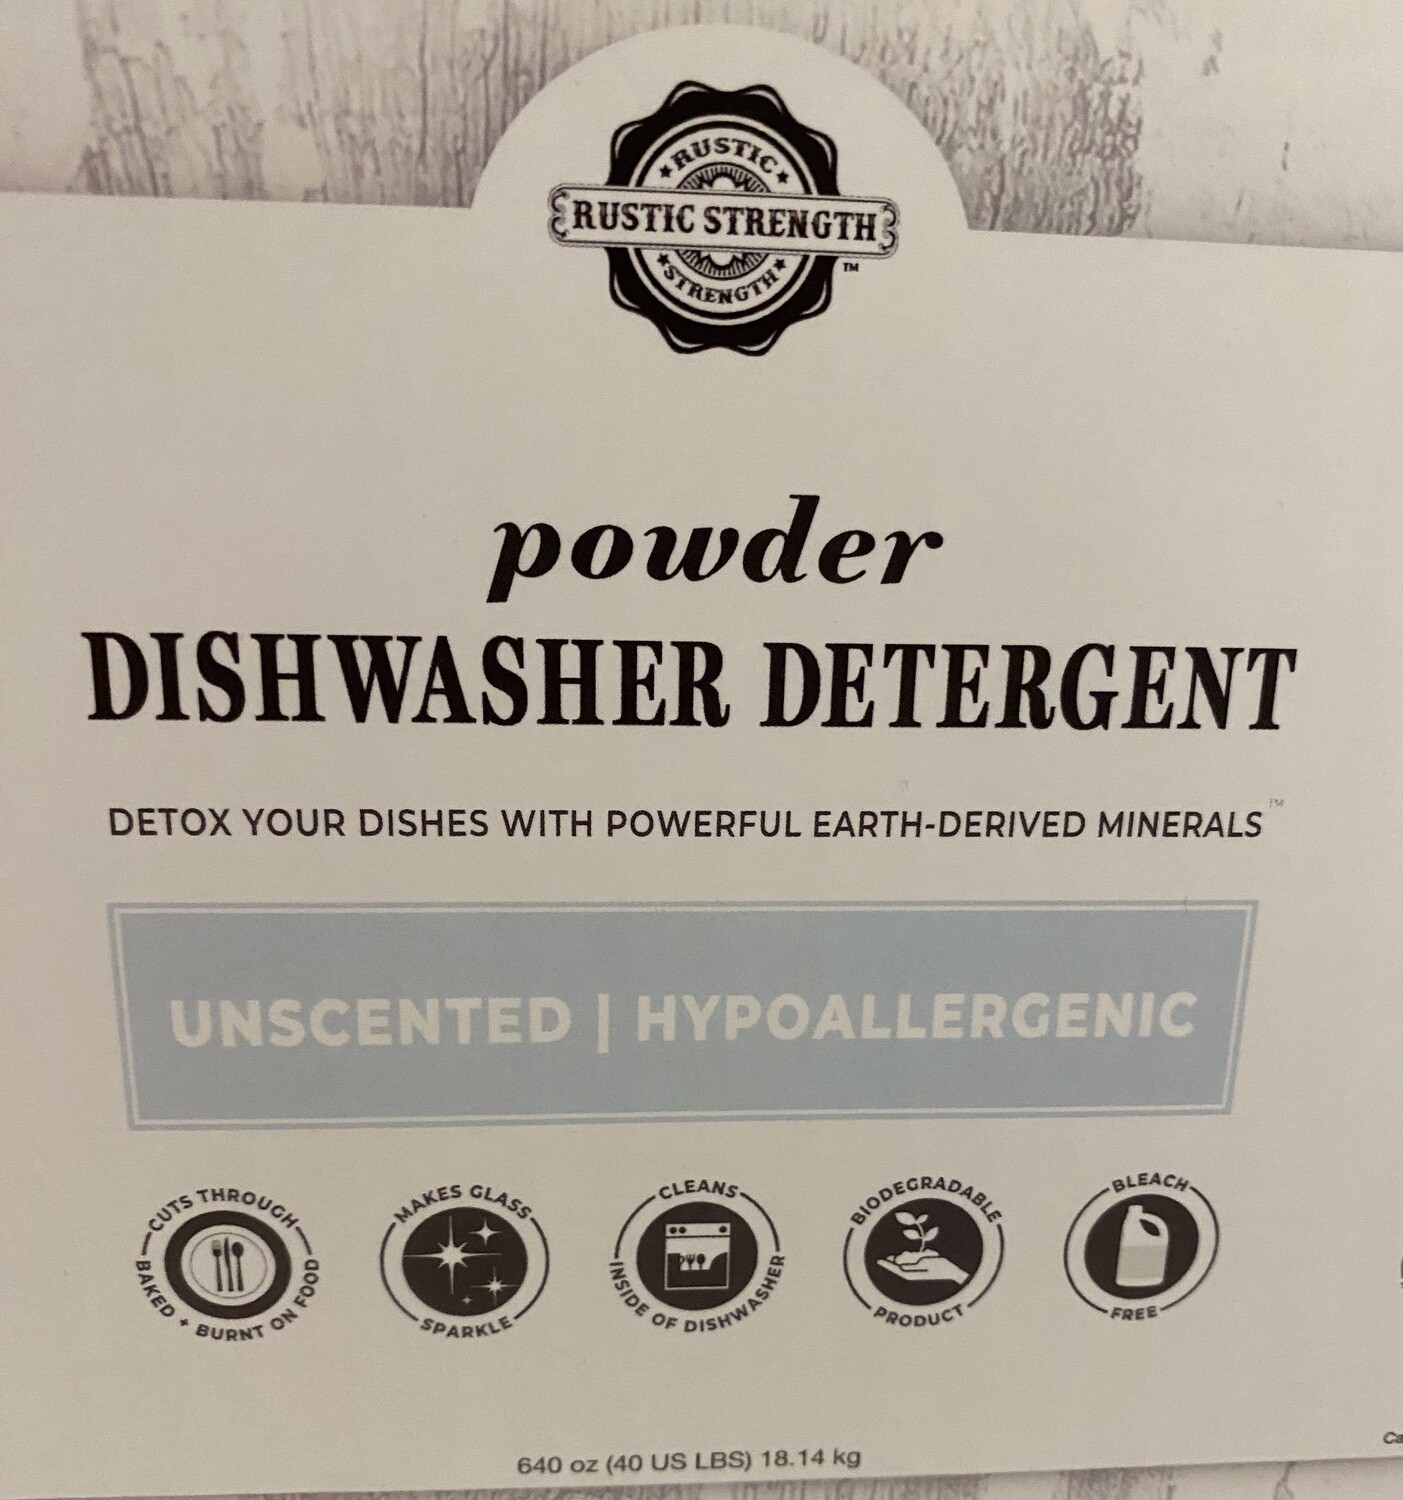 Rustic Strength Automatic Dishwasher Powder Bulk
(for refills by the oz)